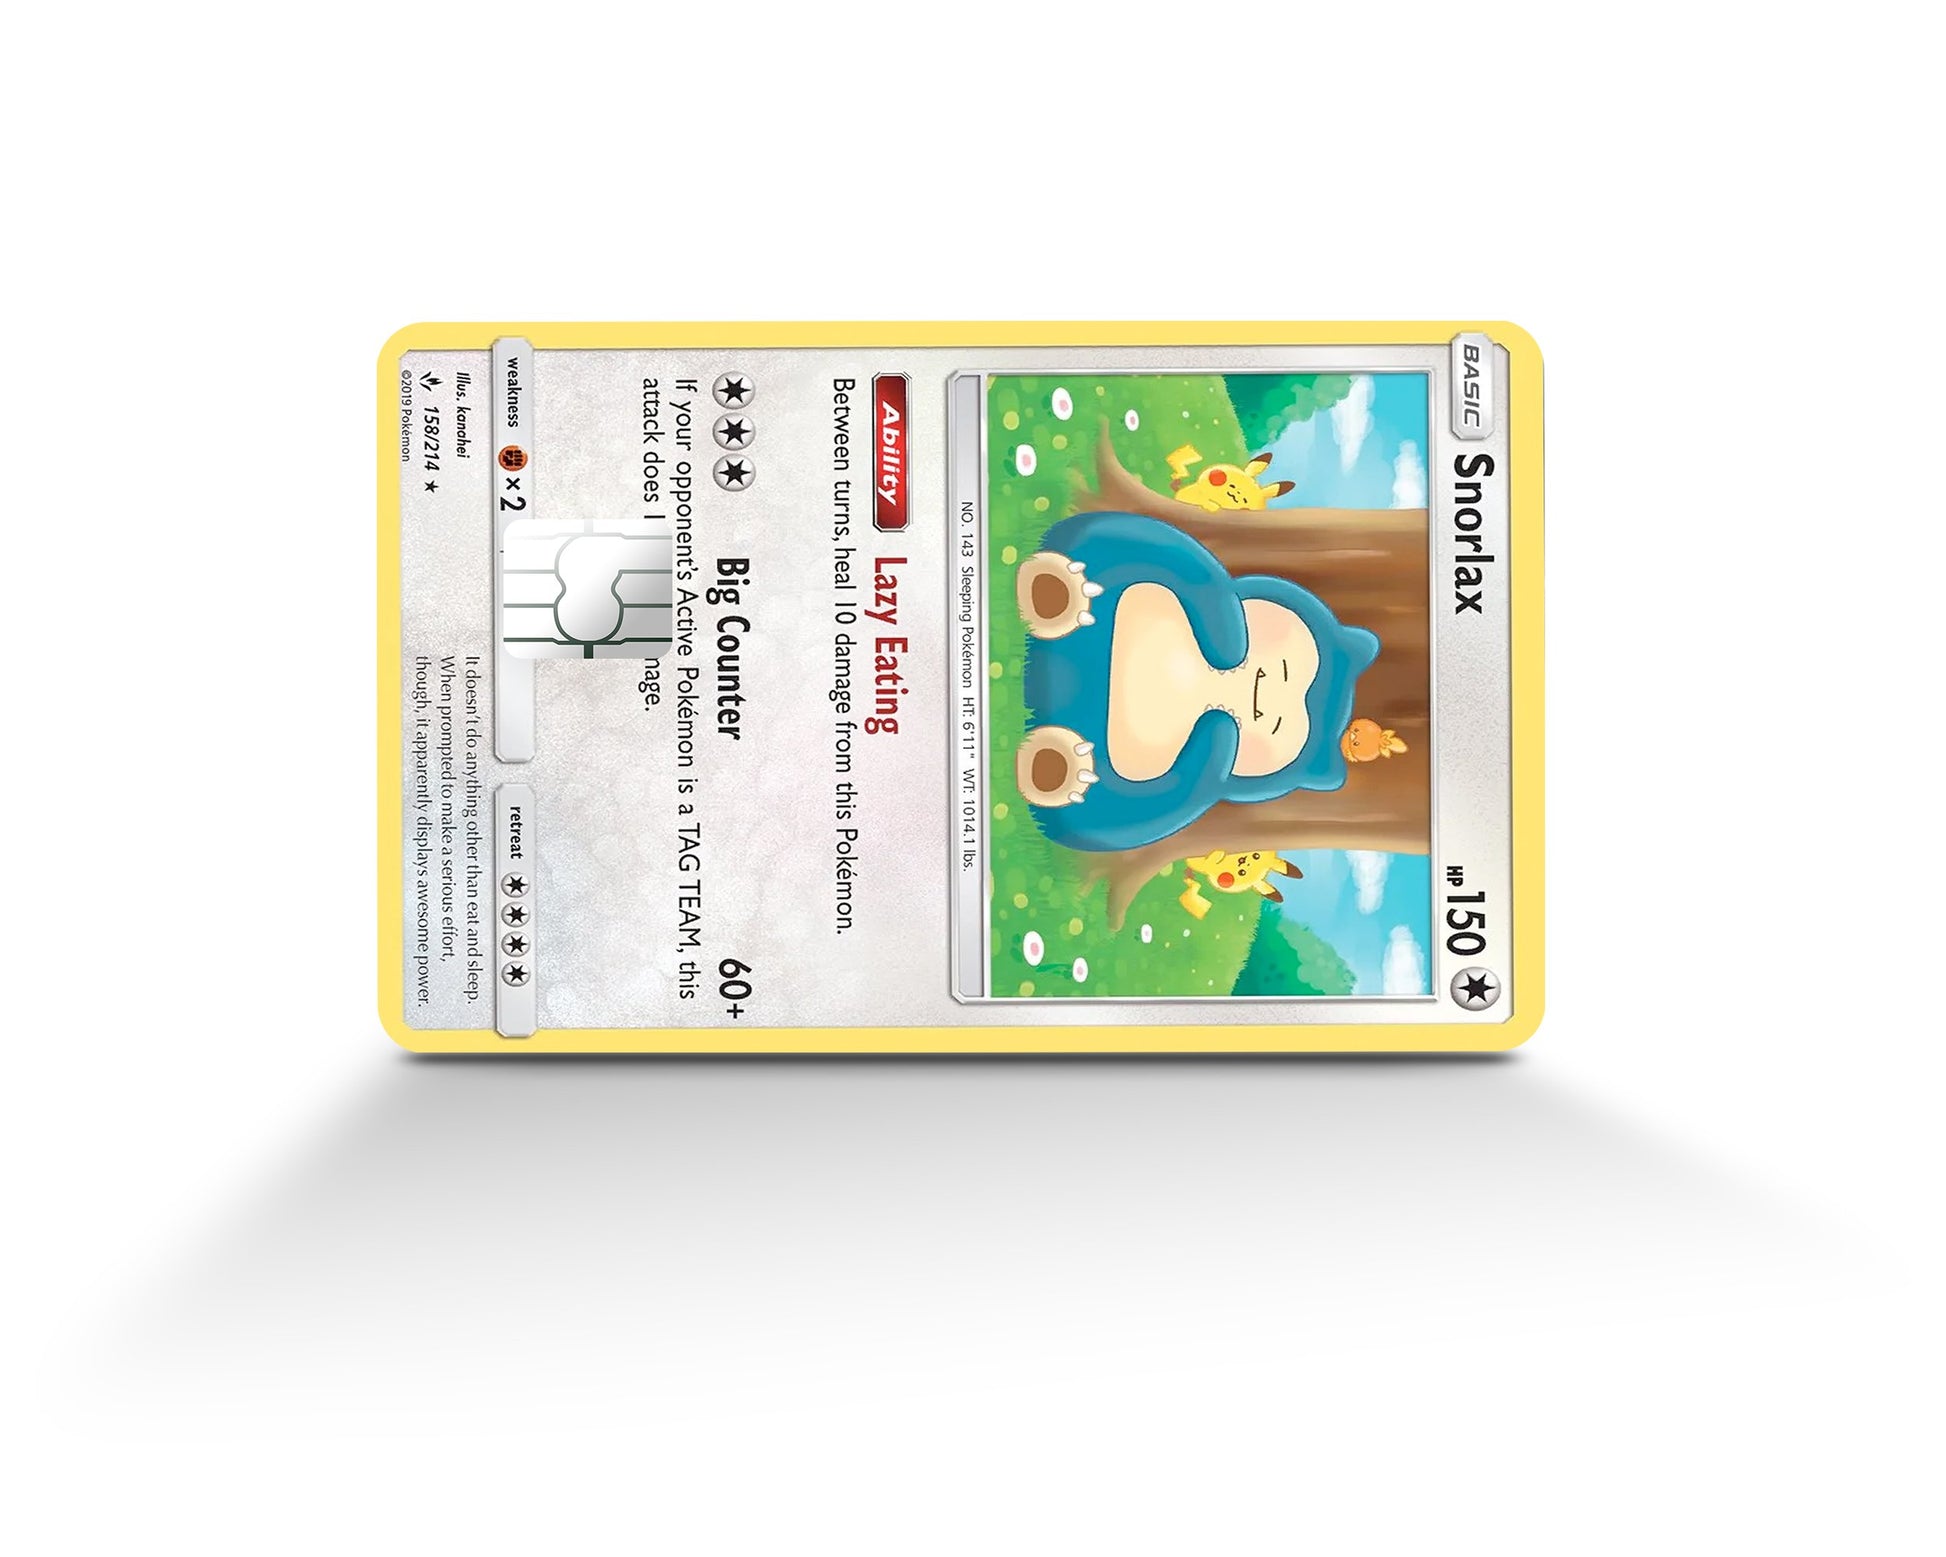 Lazy Snorlax Pokemon Credit Card Credit Card Skin – Anime Town Creations